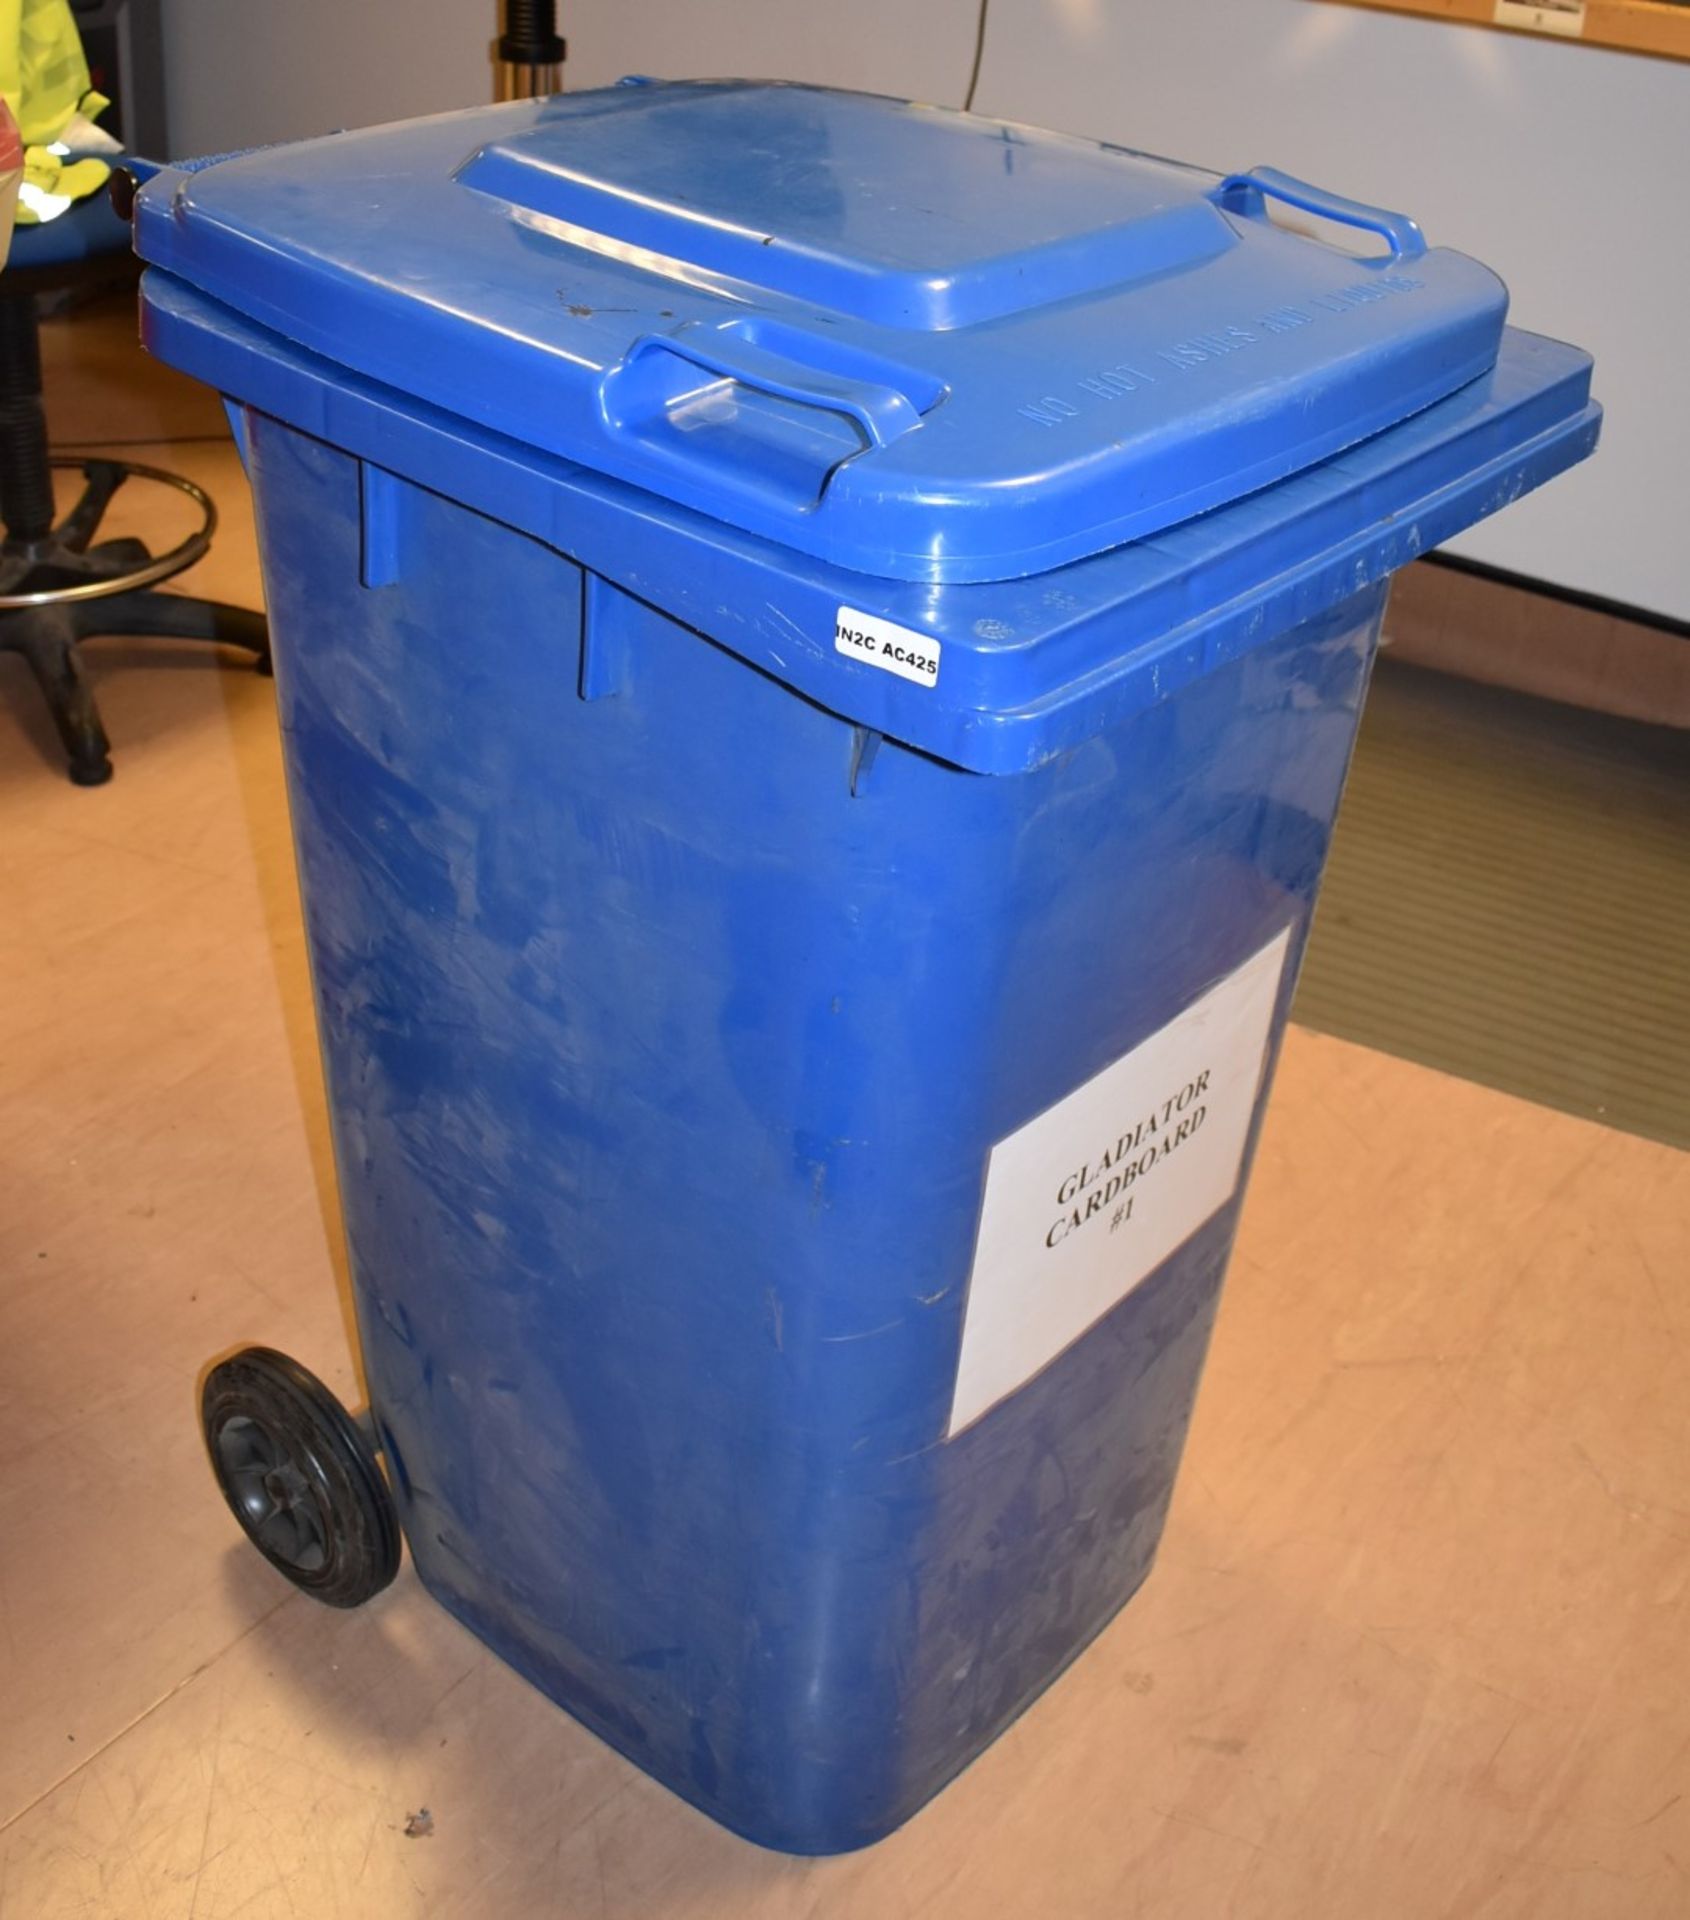 1 x Wheelie Waste Bin in Blue - 240 Litre - Previously Used Indoors Only - Good Clean Condition -